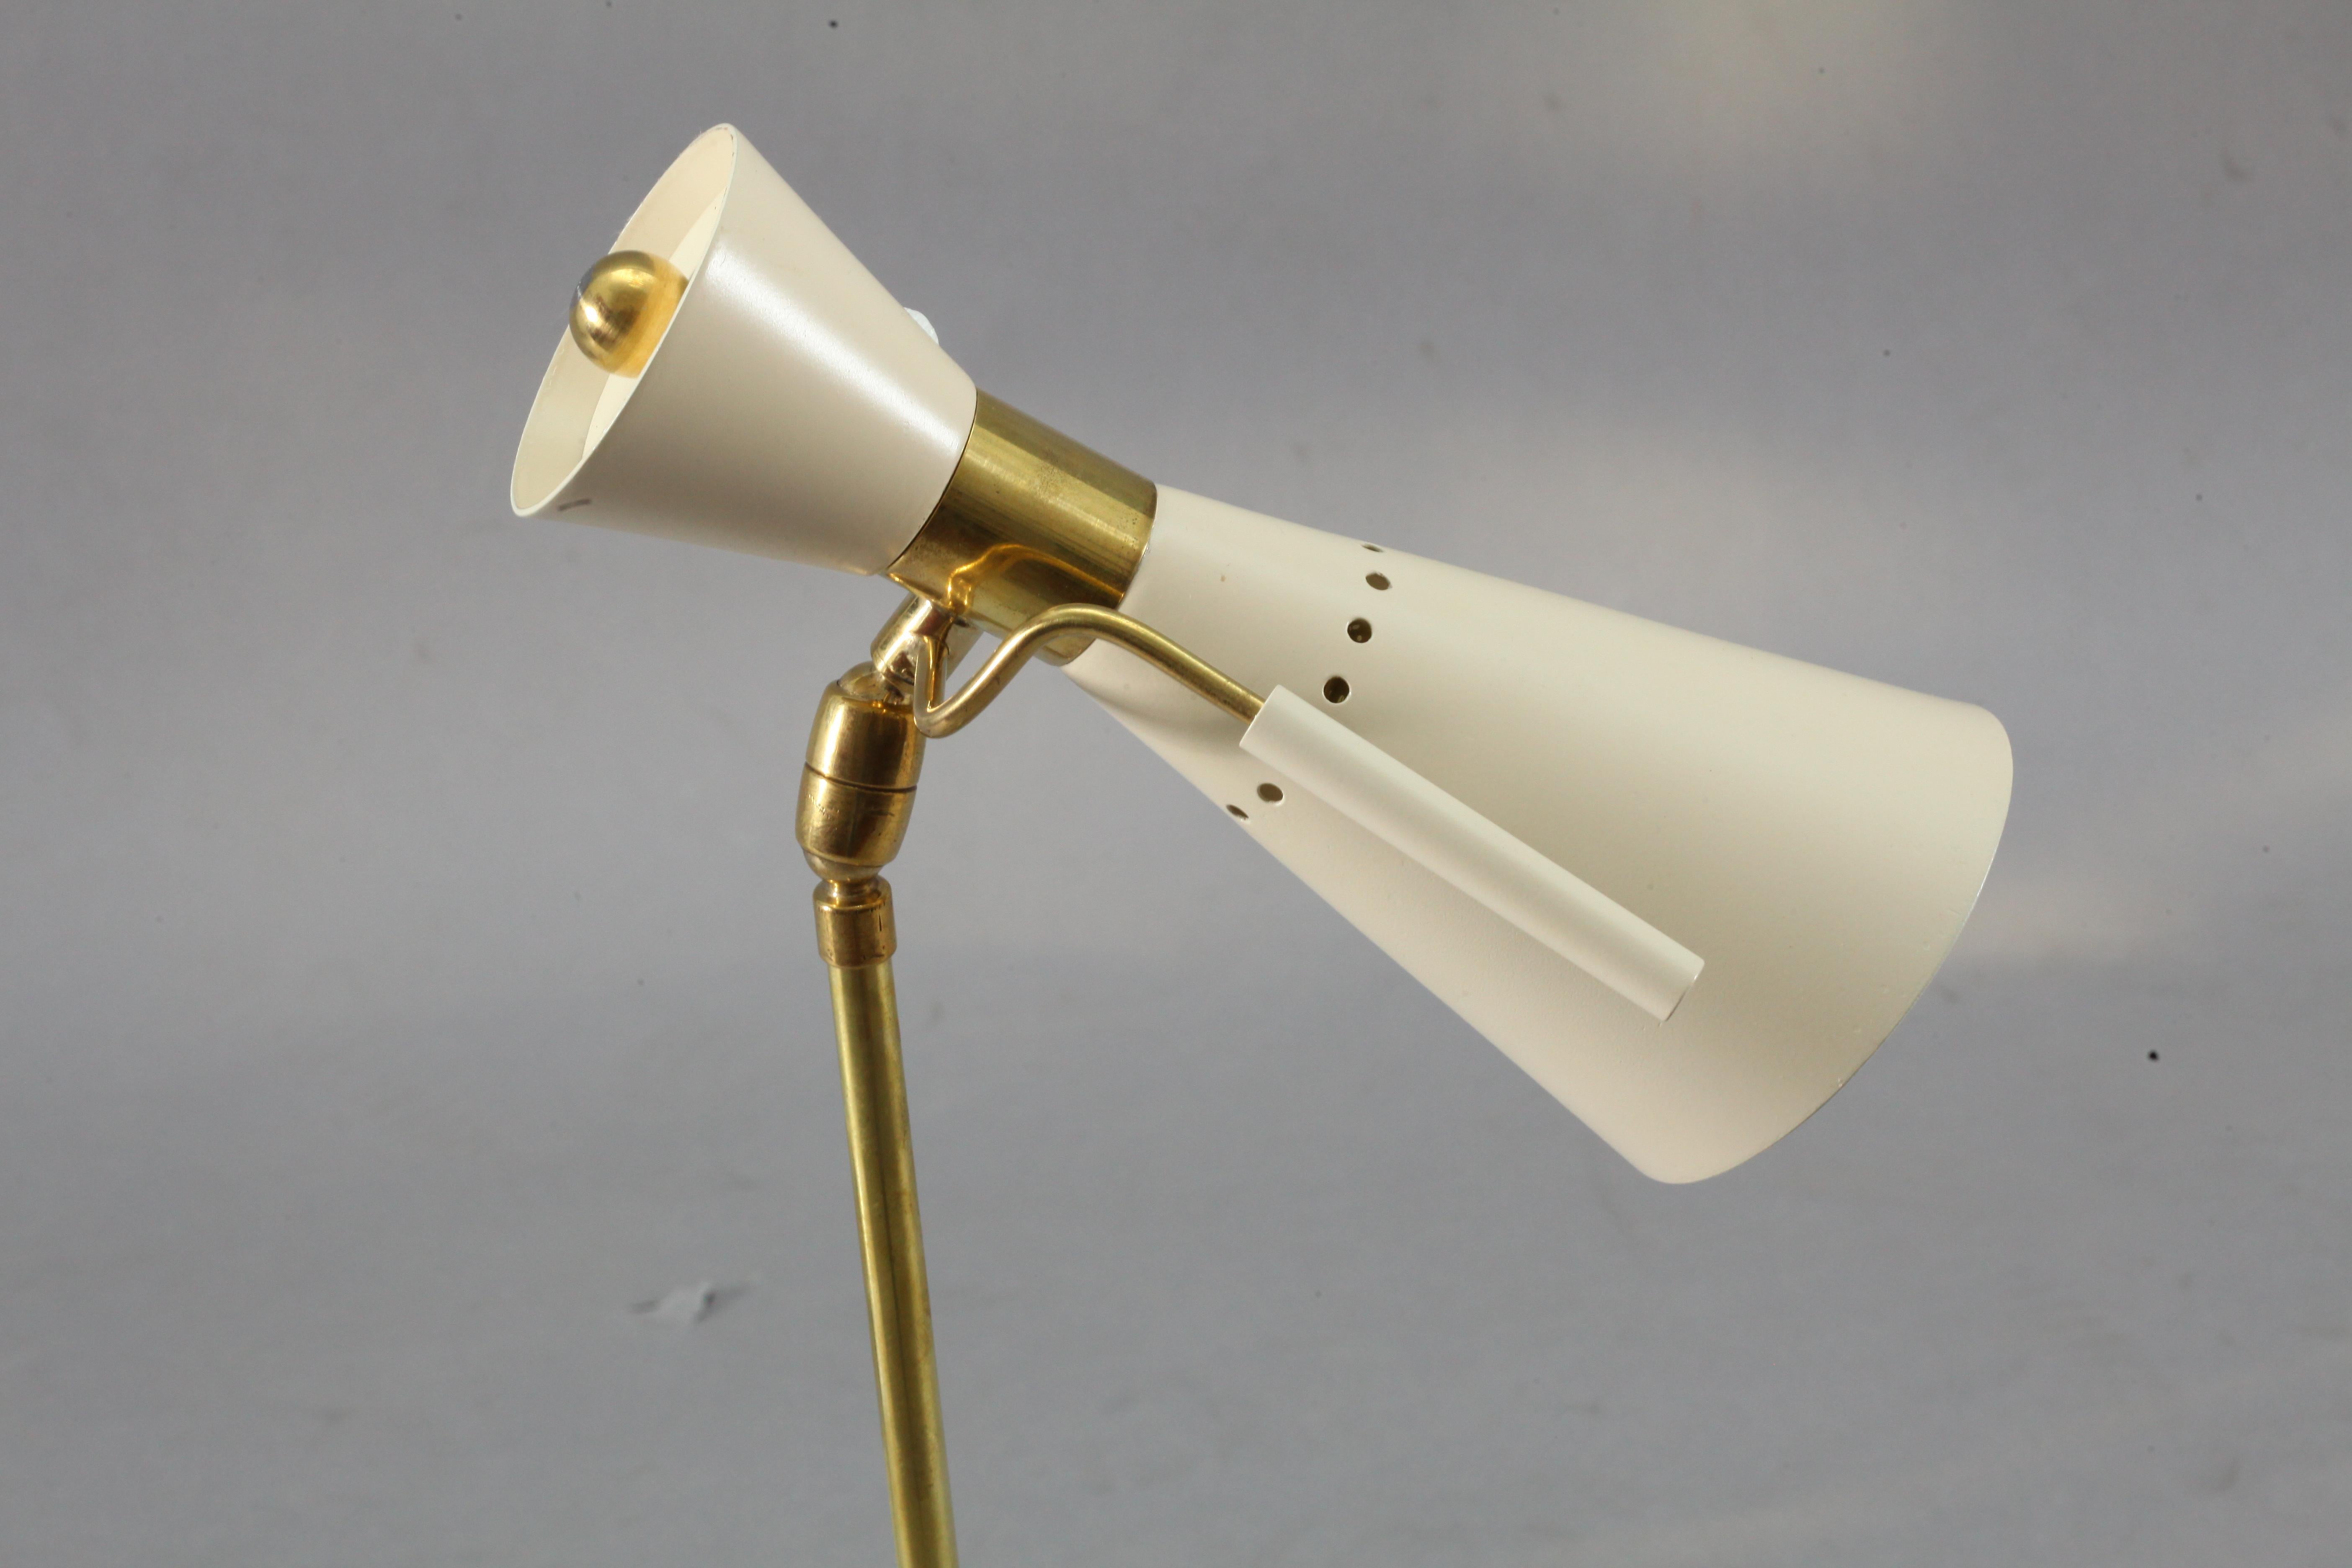 Table lamp,
attributed to Angelo Lelli
Italy, 1950.
Brass base and stam,
movable shade with brass hand grip.